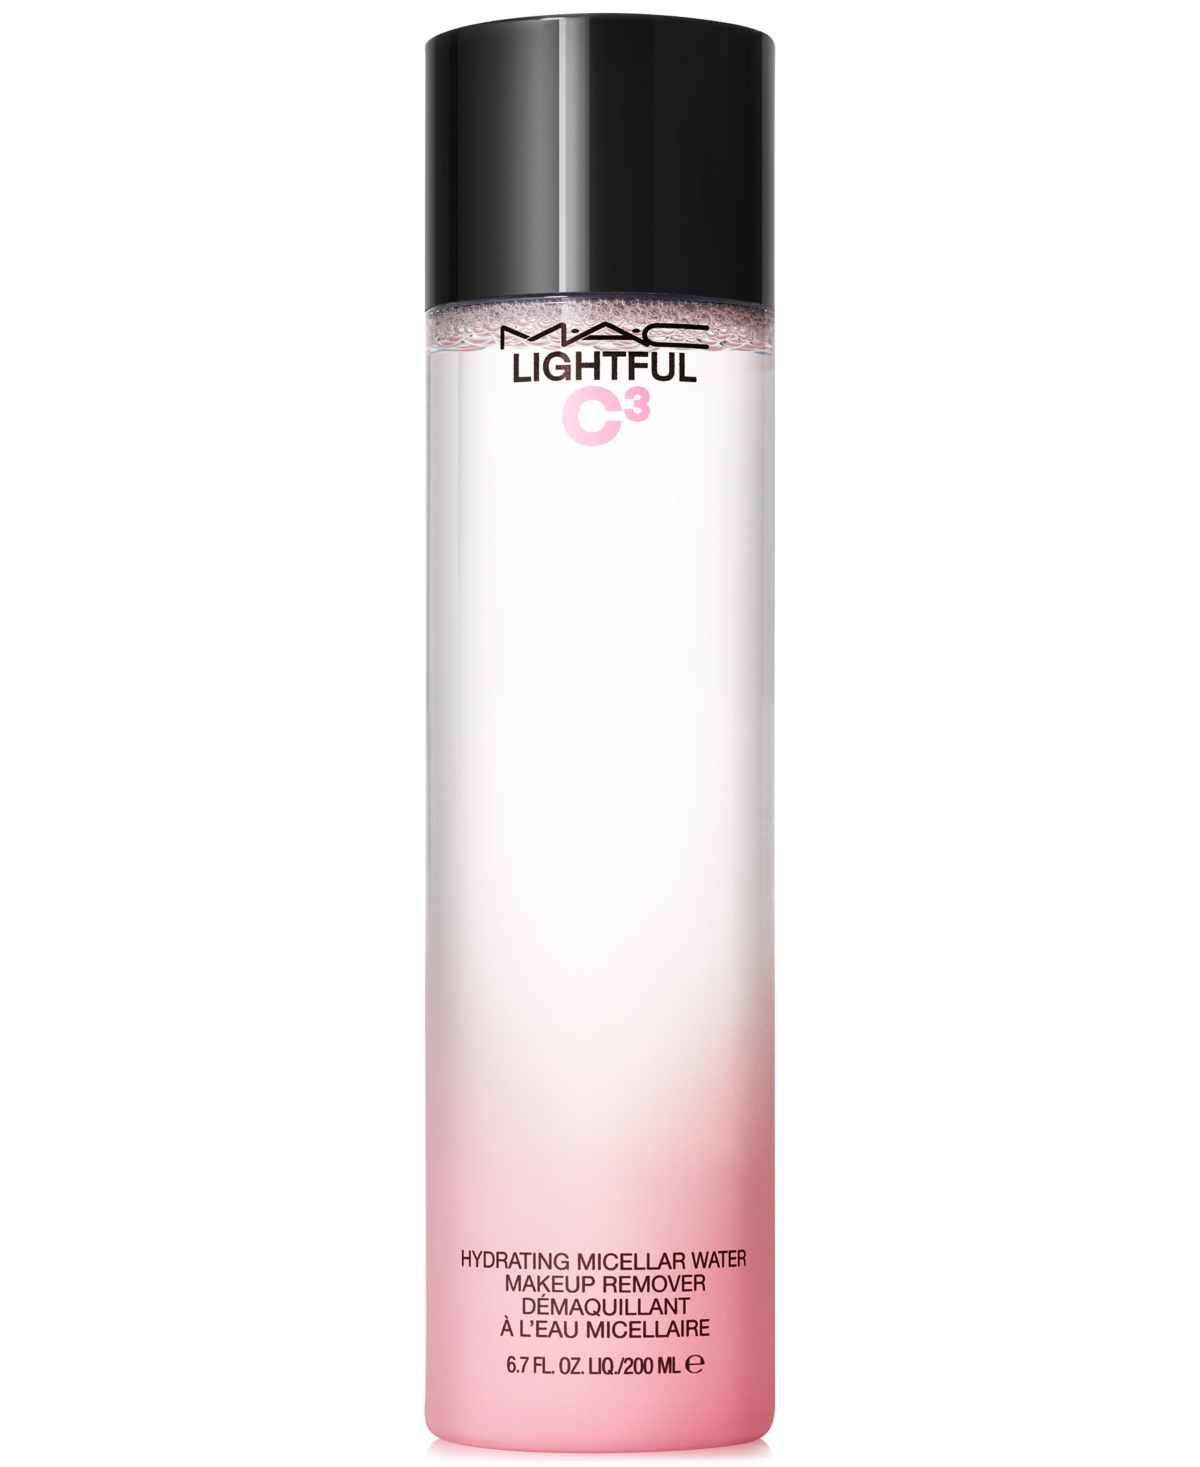 Mac Lightful C³ Hydrating Micellar Water Makeup Remover In No Color